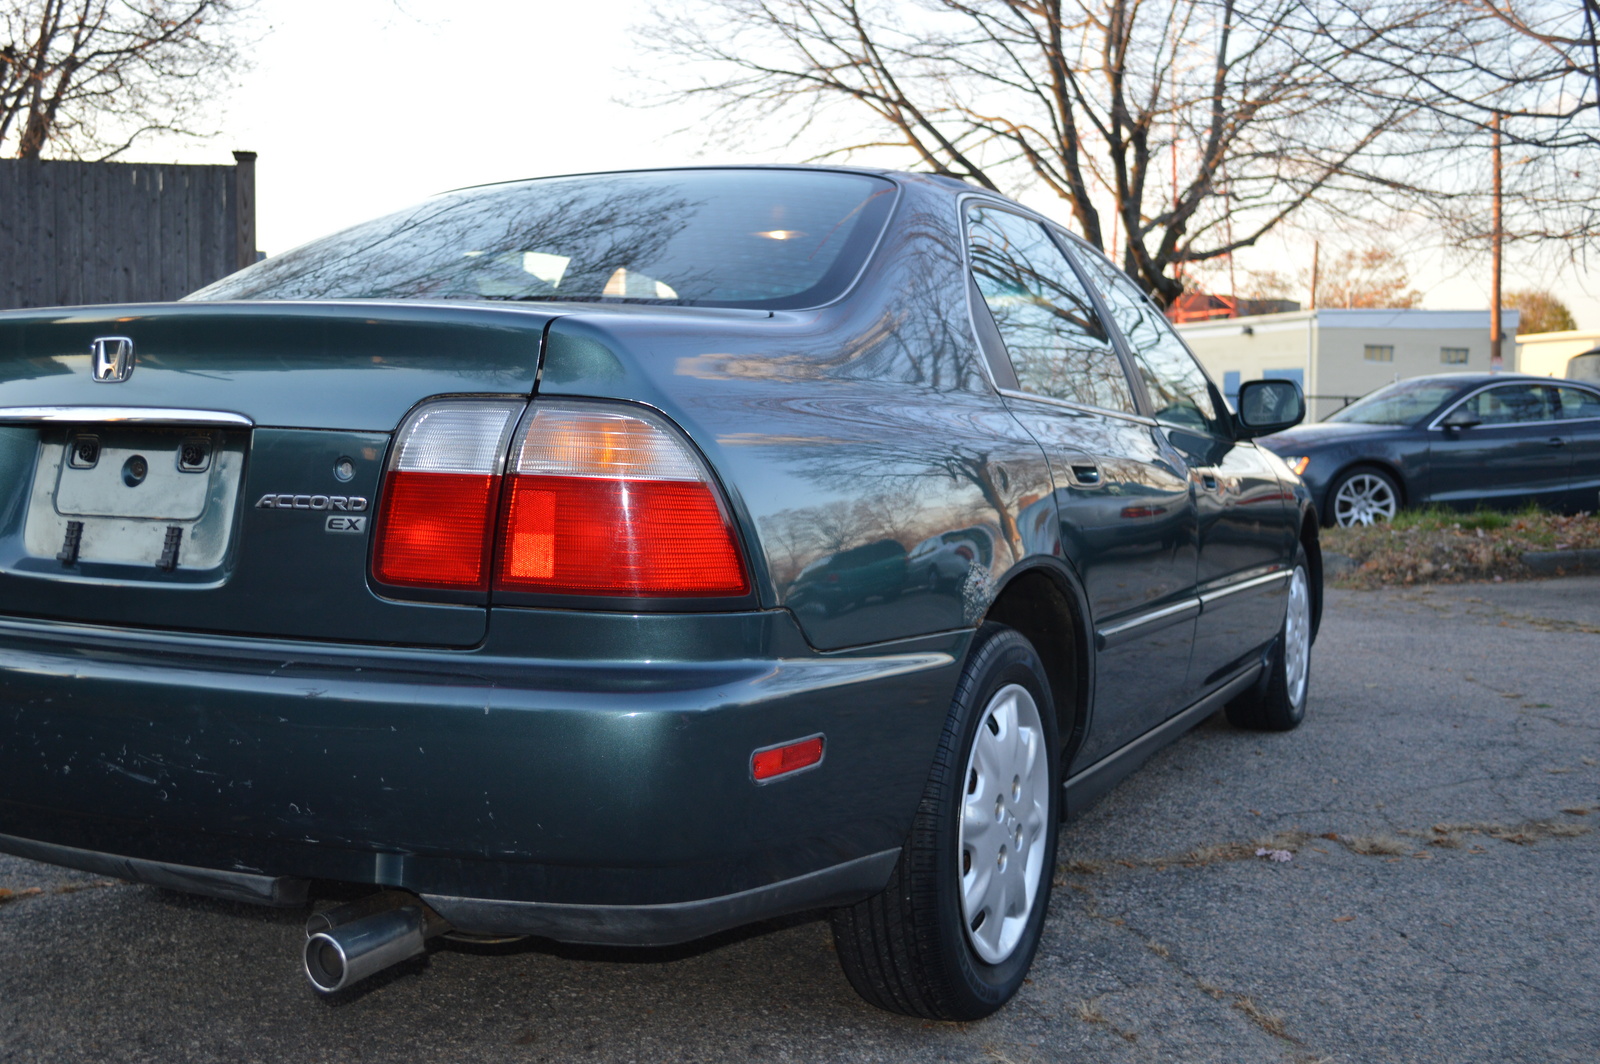 1997 Honda accord special edition features